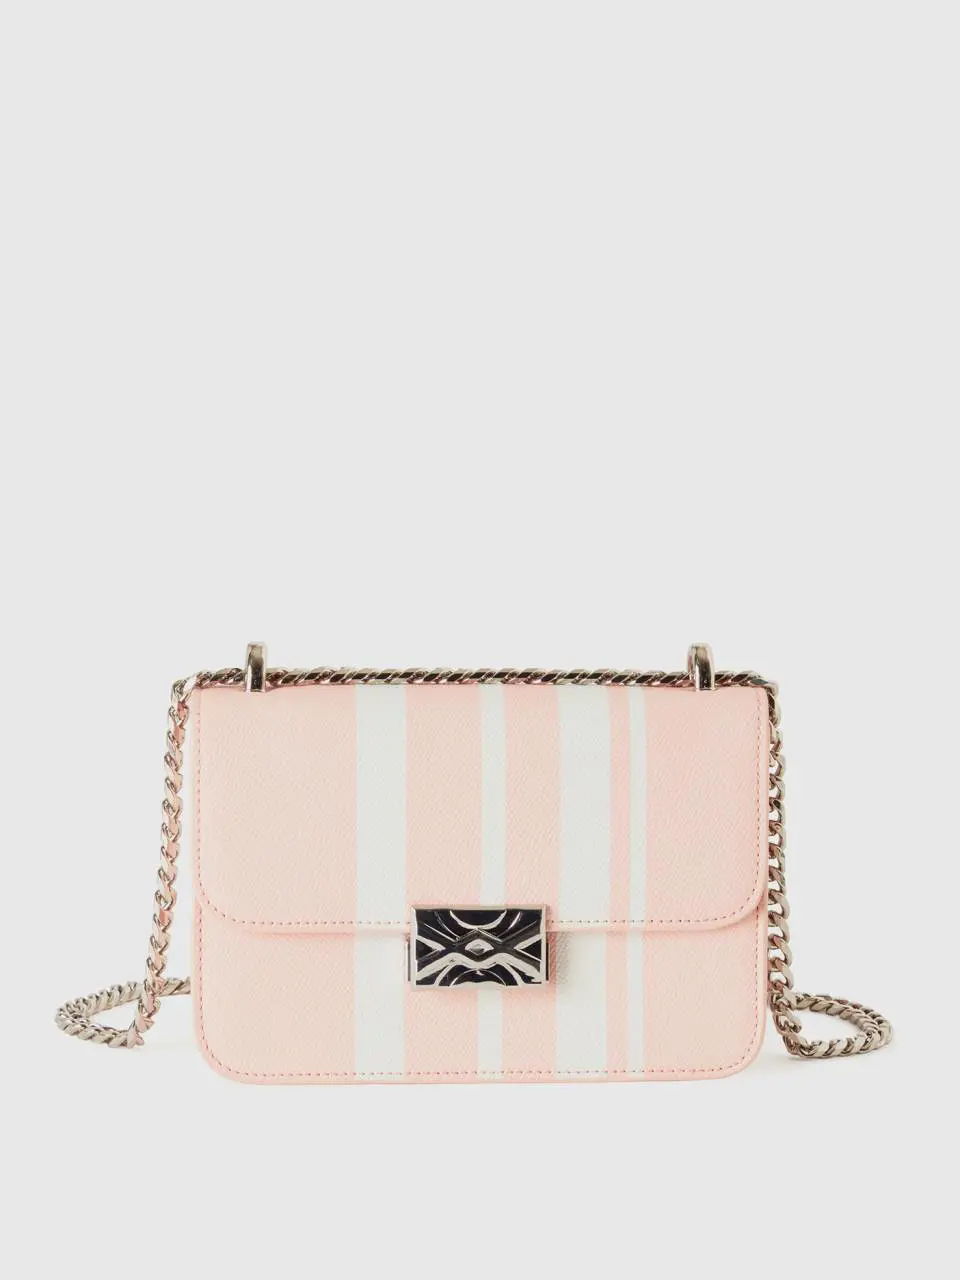 Benetton small pink striped be bag. 1